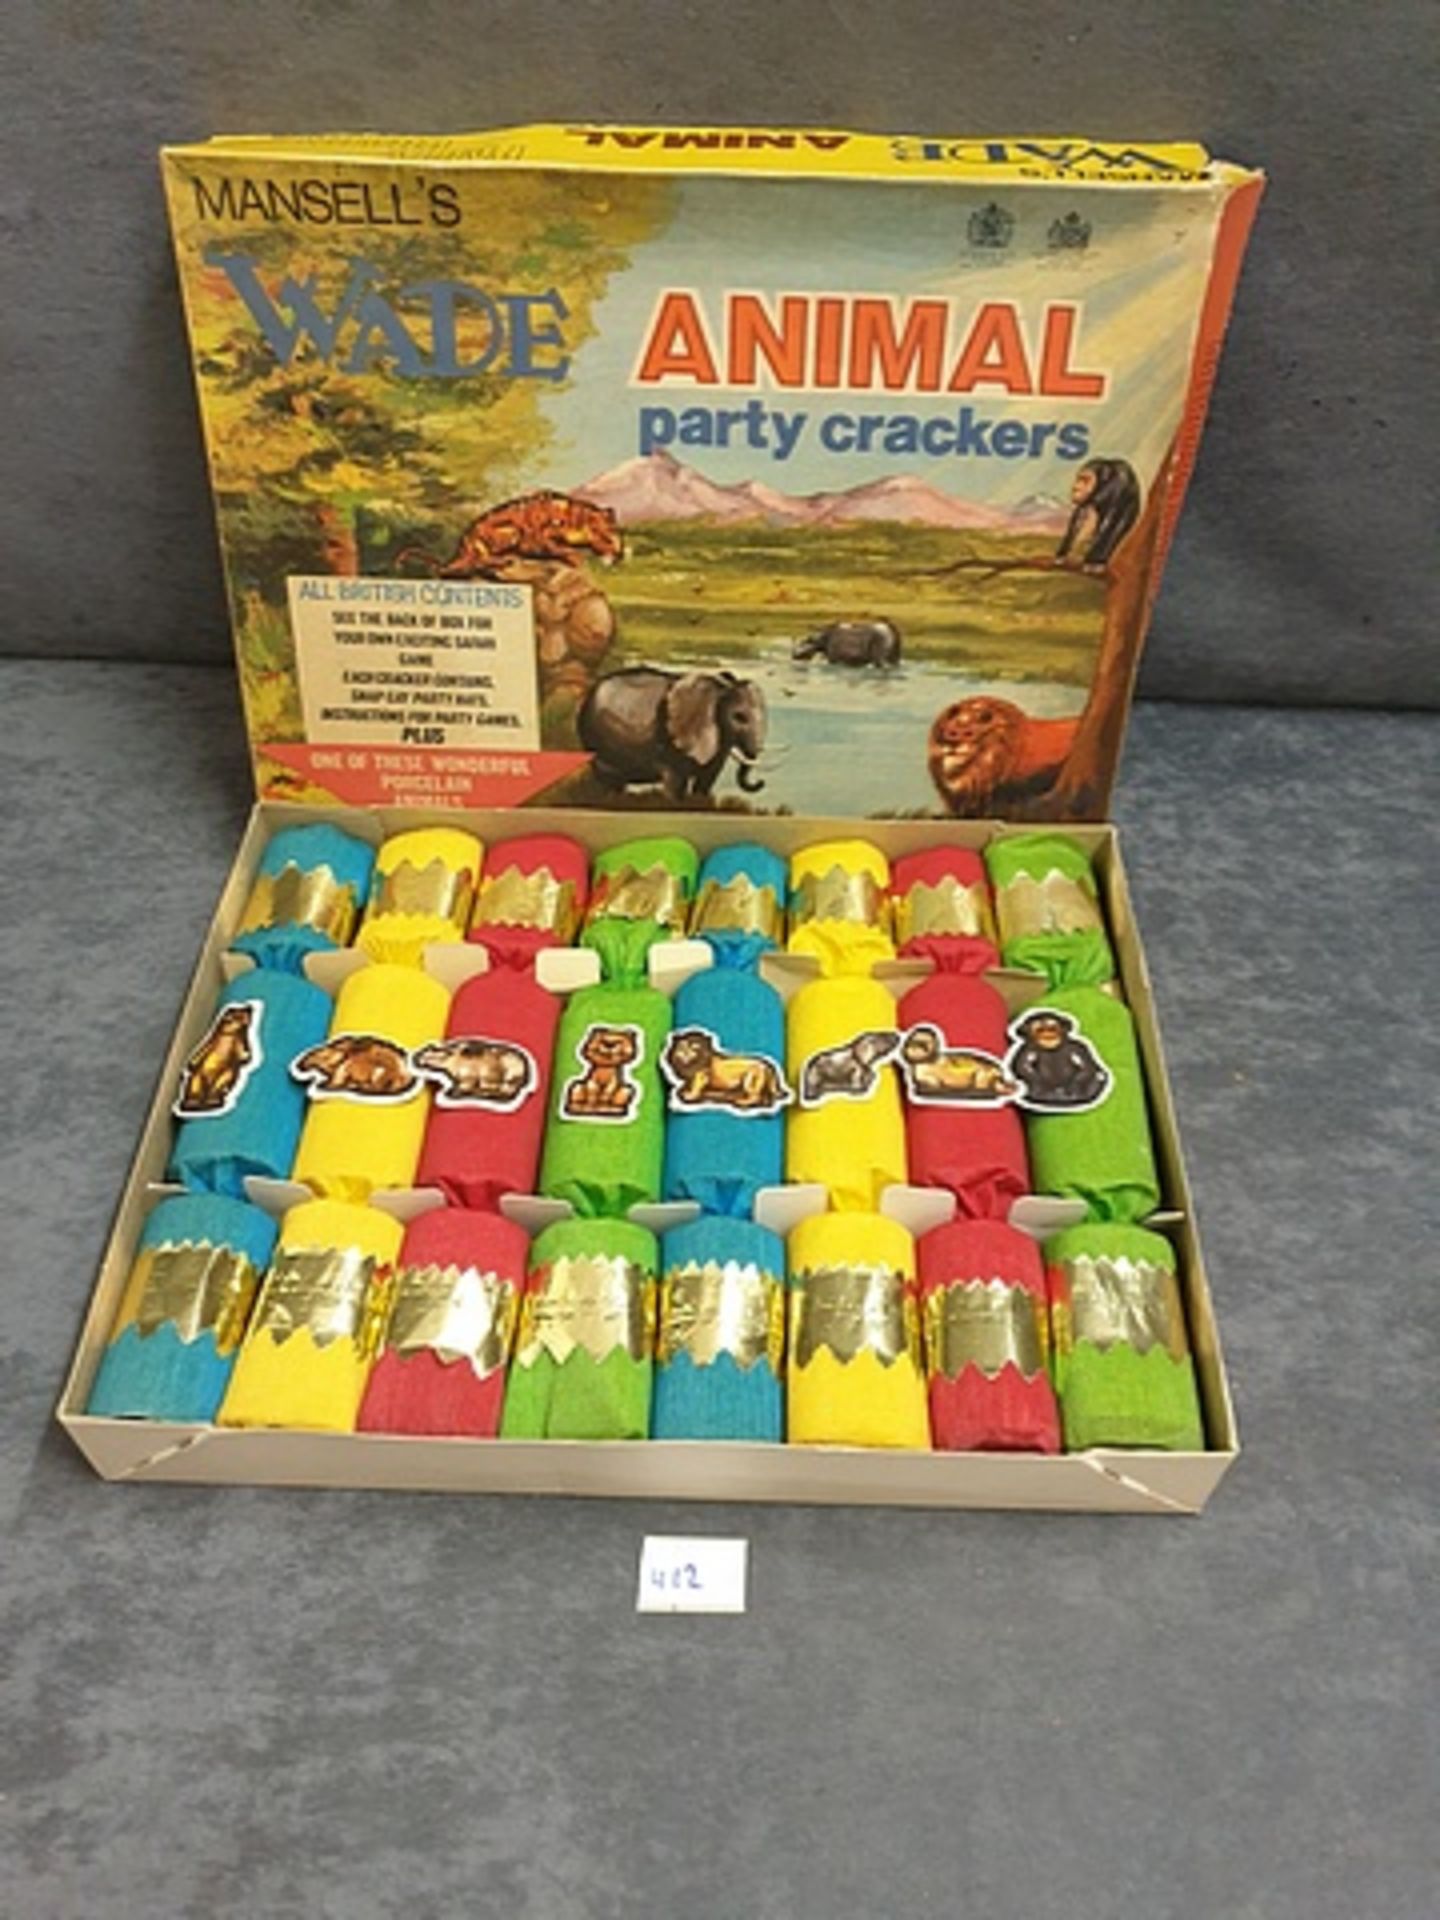 Vintage Boxed Mansell's Wade 8 Crepe Animal Party Crackers - Image 2 of 2